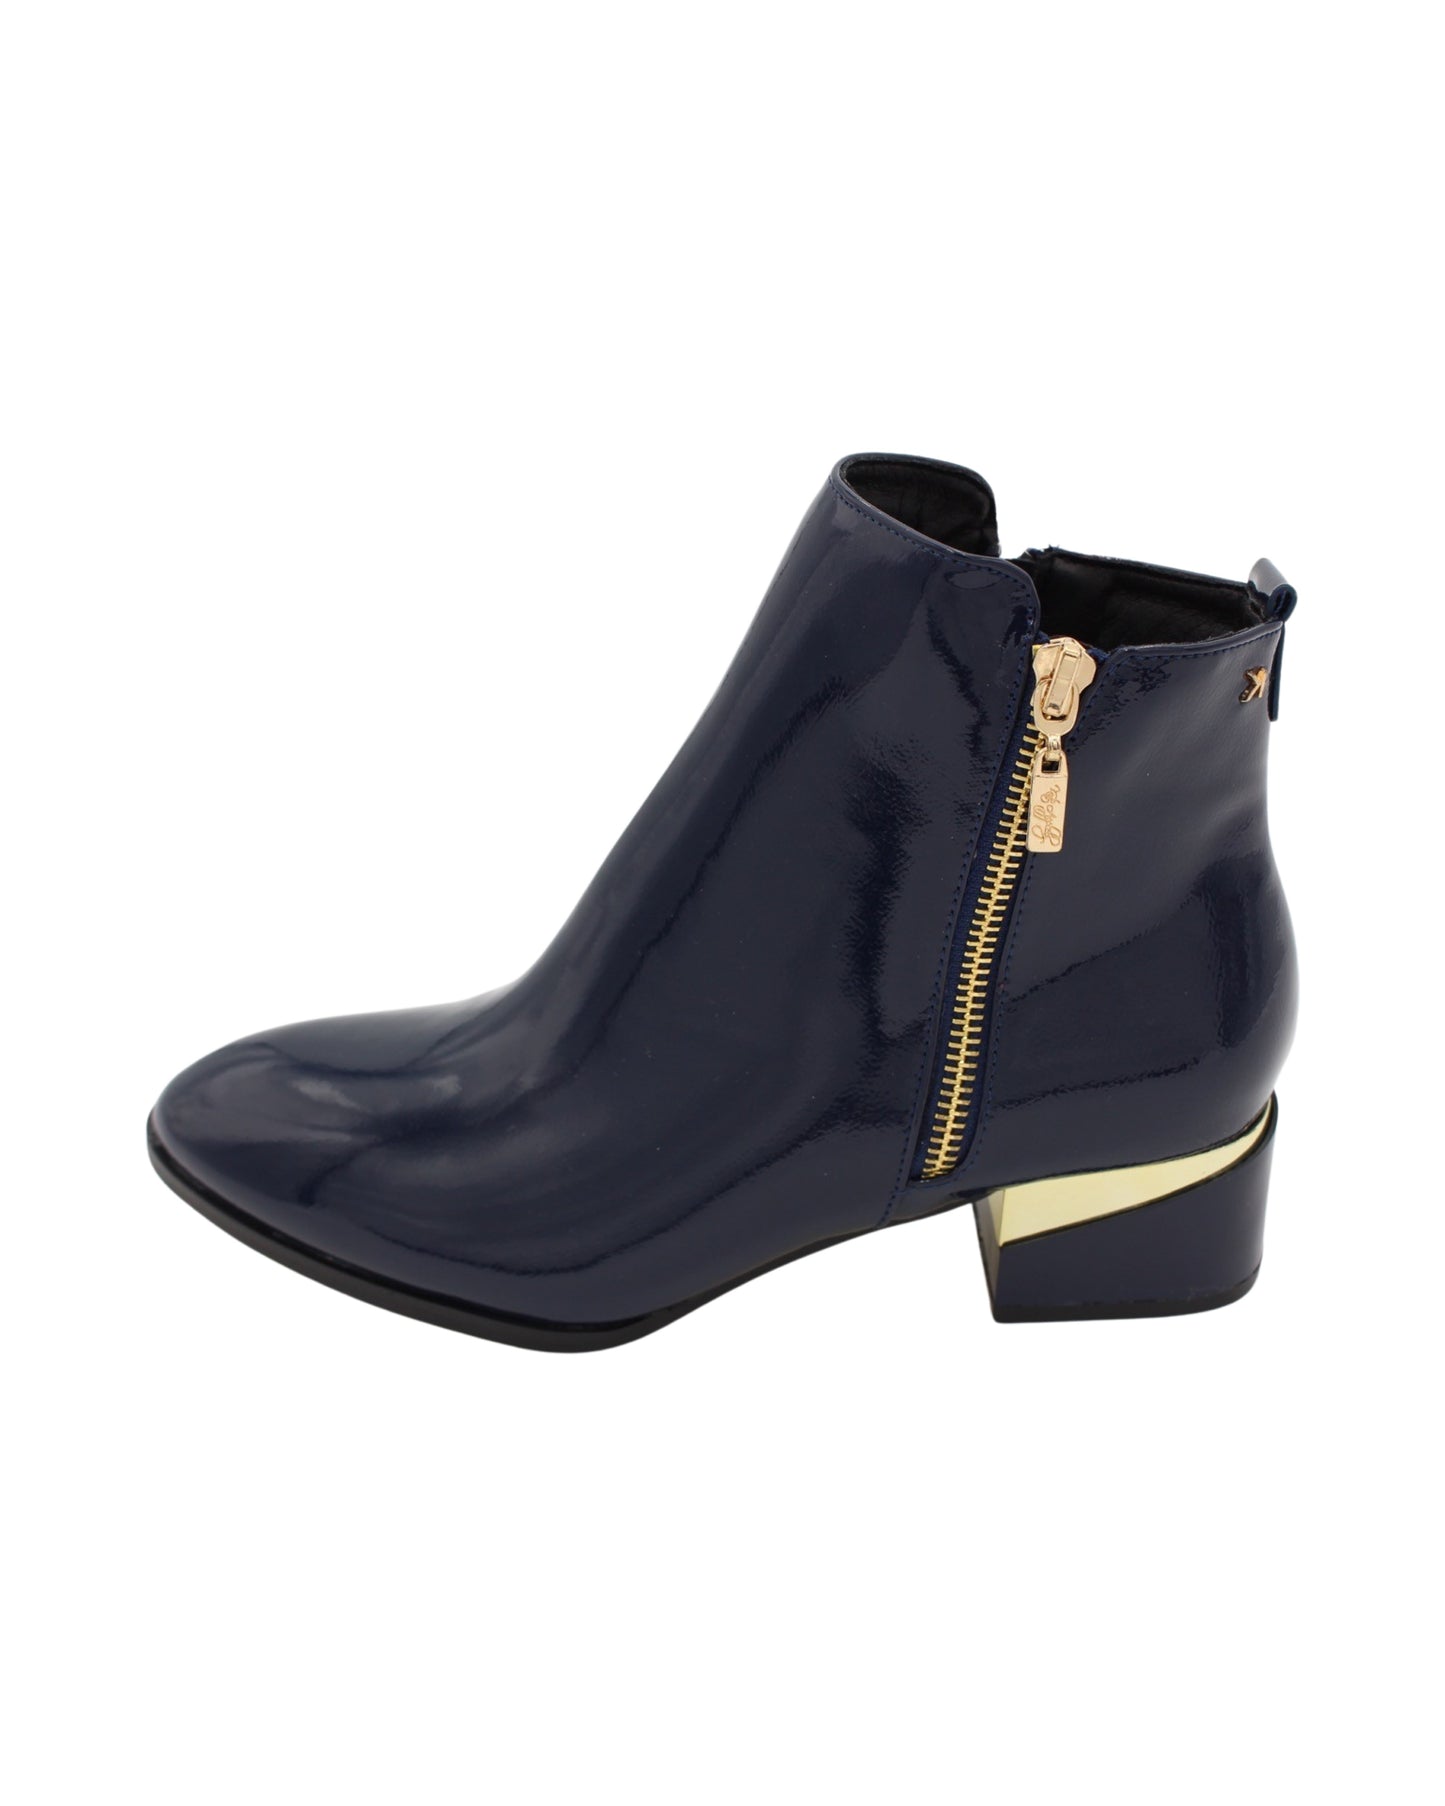 Kate Appleby - Ladies Shoes Ankle Boots Navy (1843)